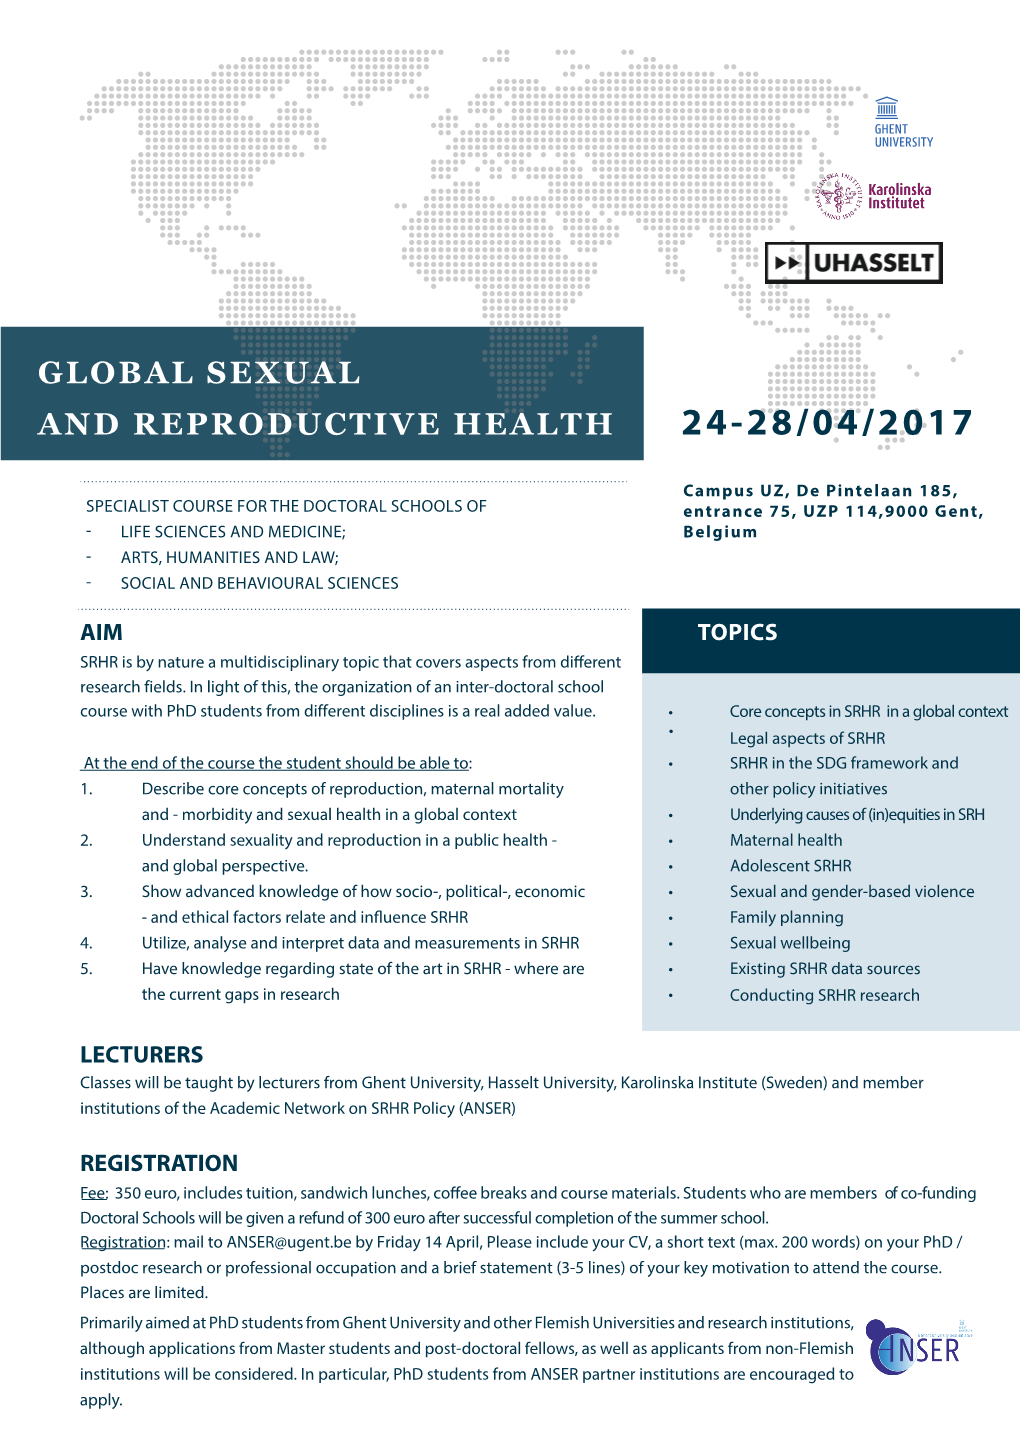 Global Sexual and Reproductive Health 24-28/04/2017